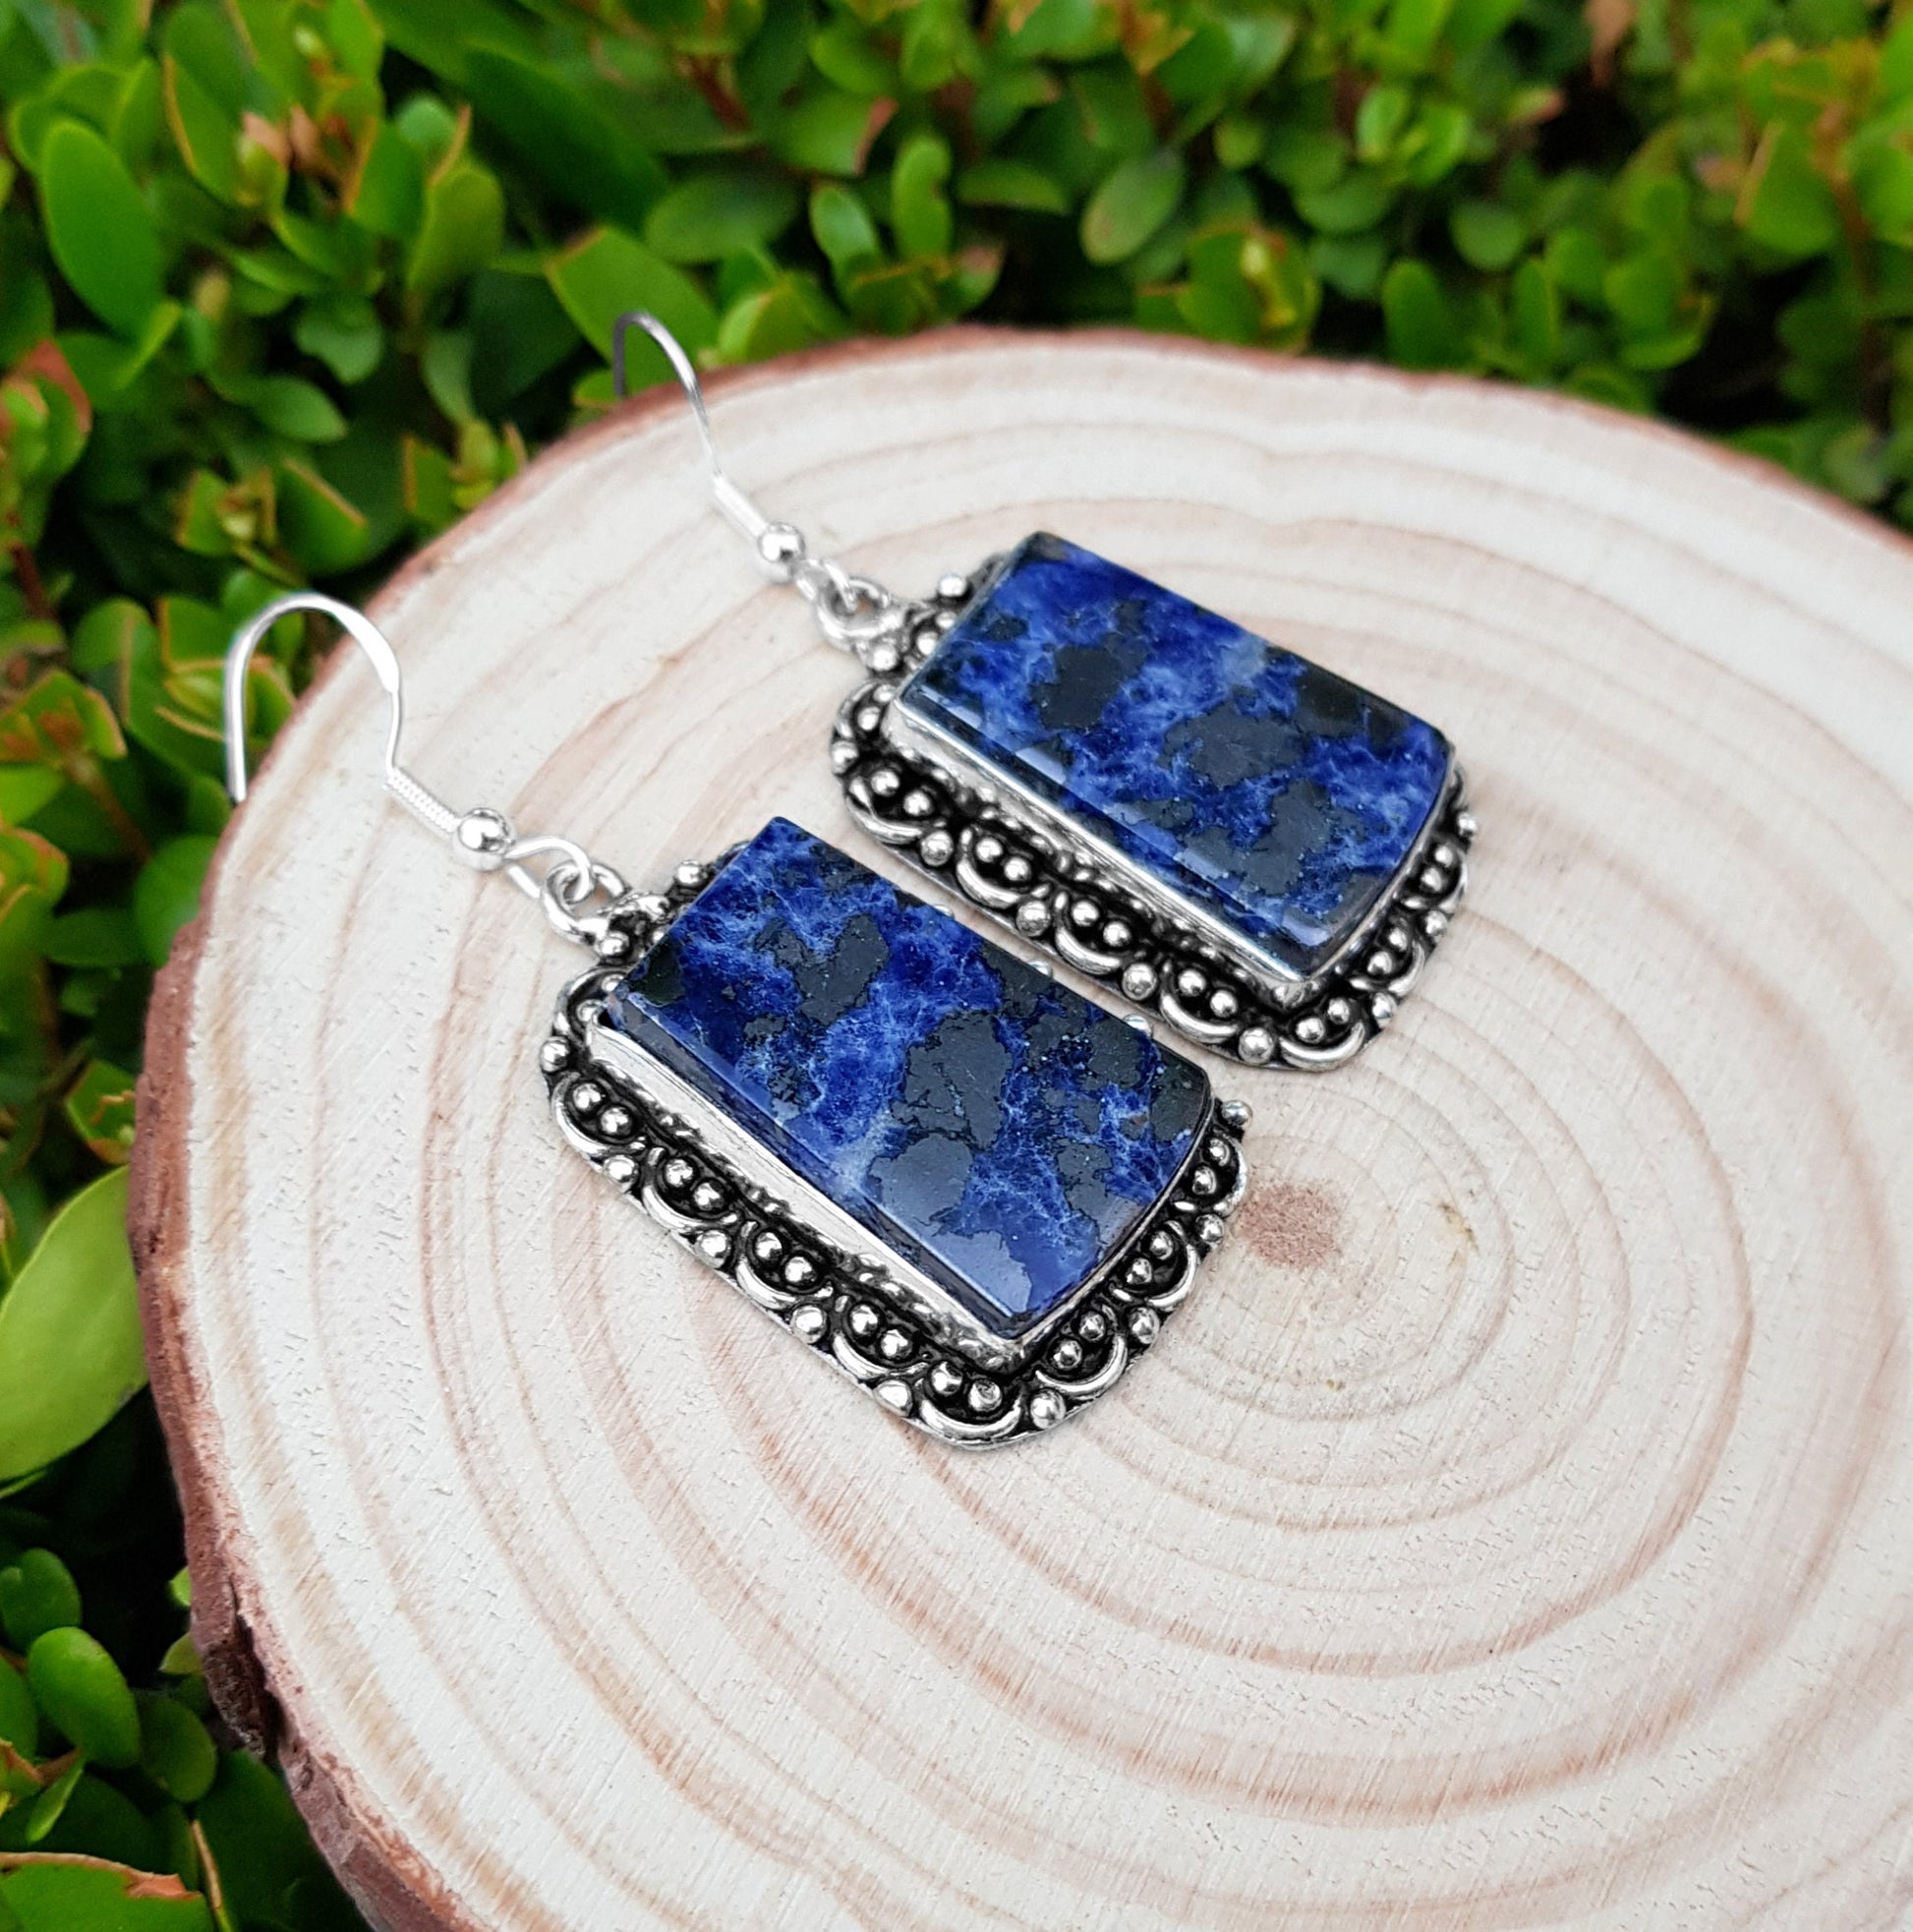 Sodalite Pyrite Earrings In Sterling Silver Dangle Earrings Boho Earrings Ethnic Earrings One Of A Kind Earrings Unique Gift For Her